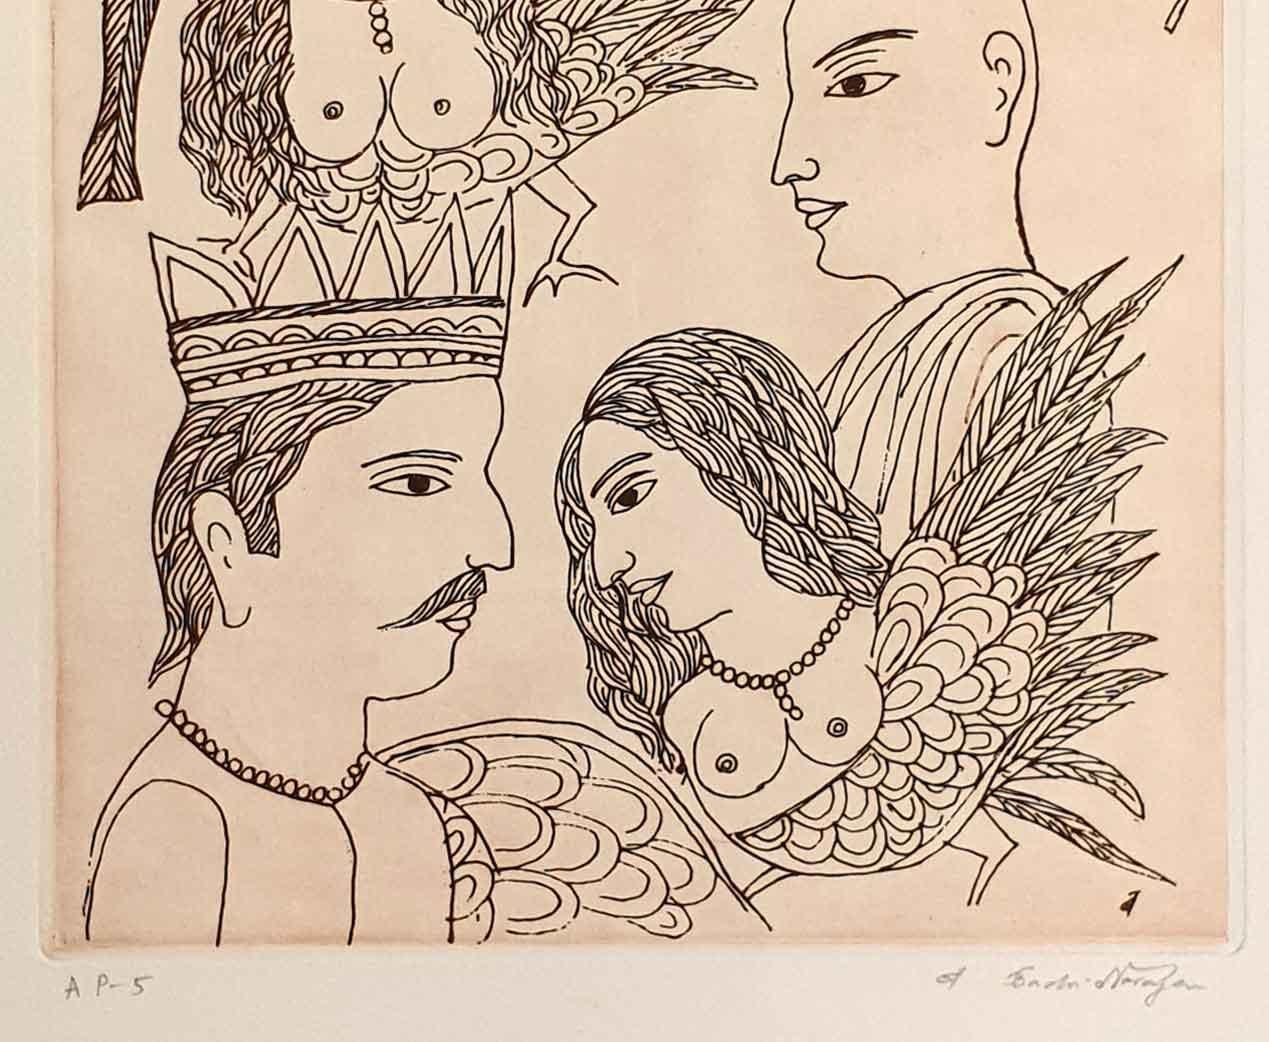 Badri Narayan - Untitled
         Size : 14.25 x 10.25 inches
Plate Size : 20.5 x 14.5 inches
Etching on paper
Edition : AP - 5
Inclusive of shipment in ready to hang form.

Style : The artist’s paintings are narrative, and titles like ‘Queen